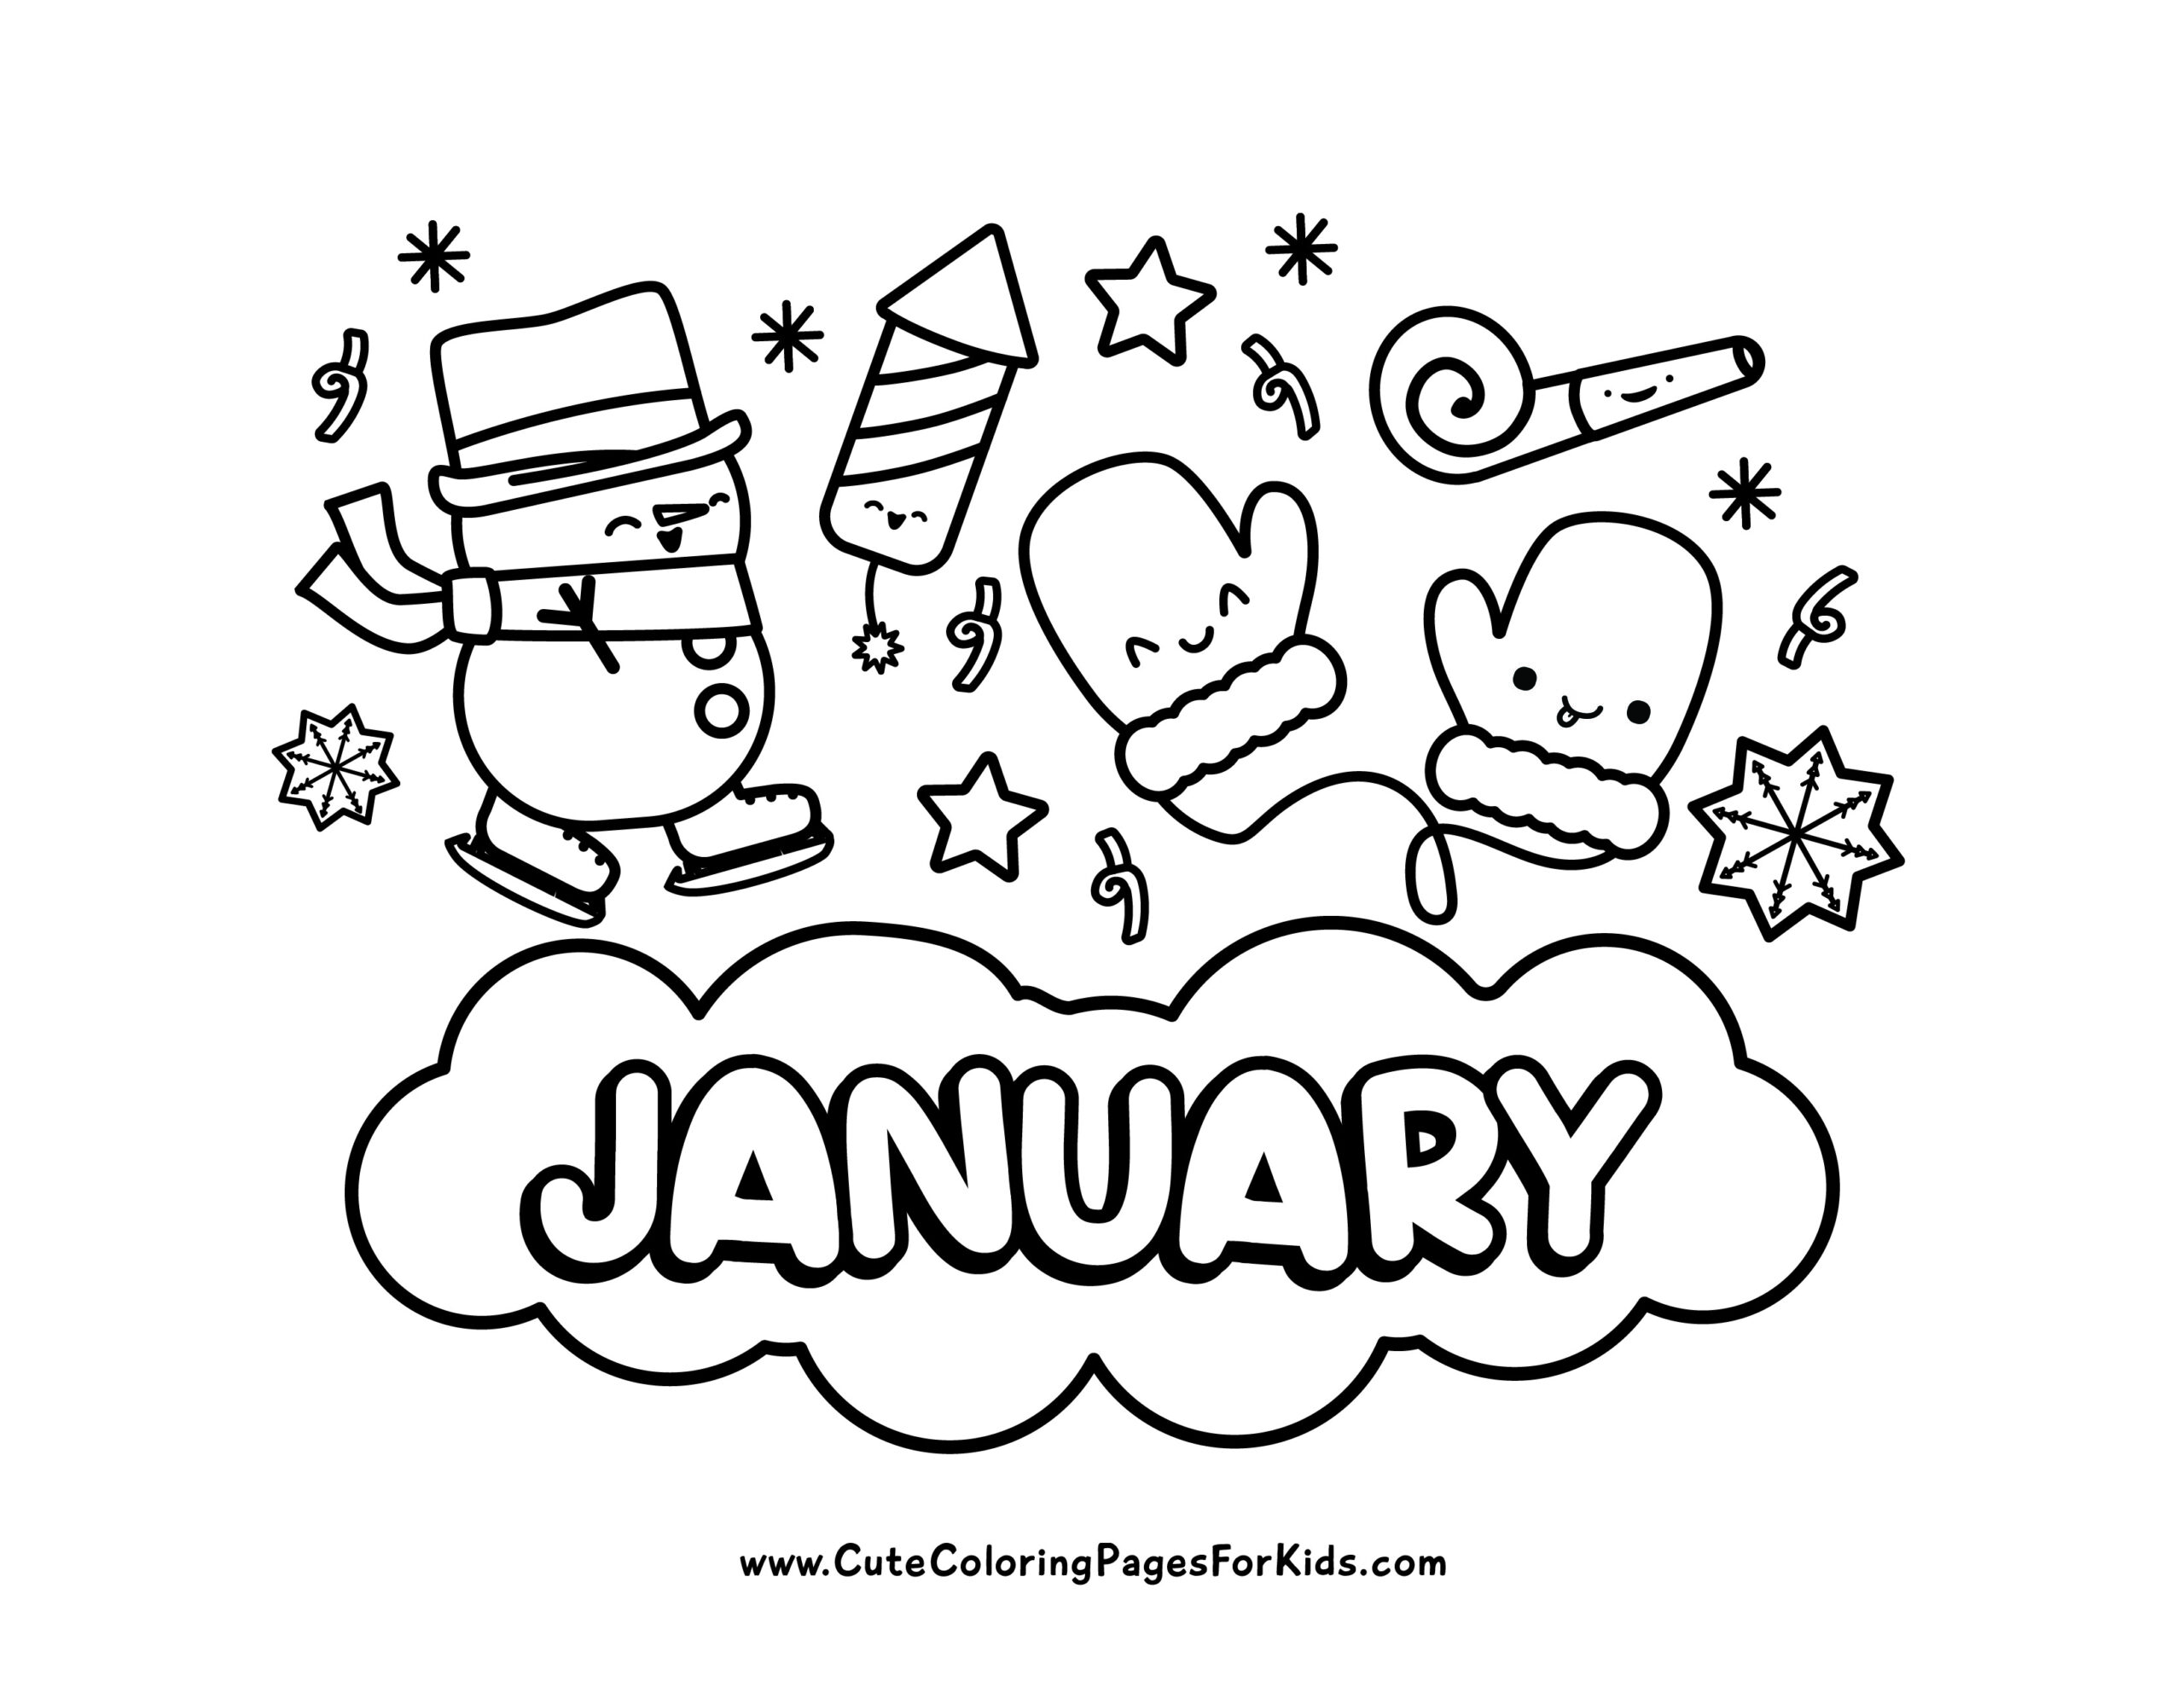 January Coloring Pages - Cute Coloring Pages For Kids